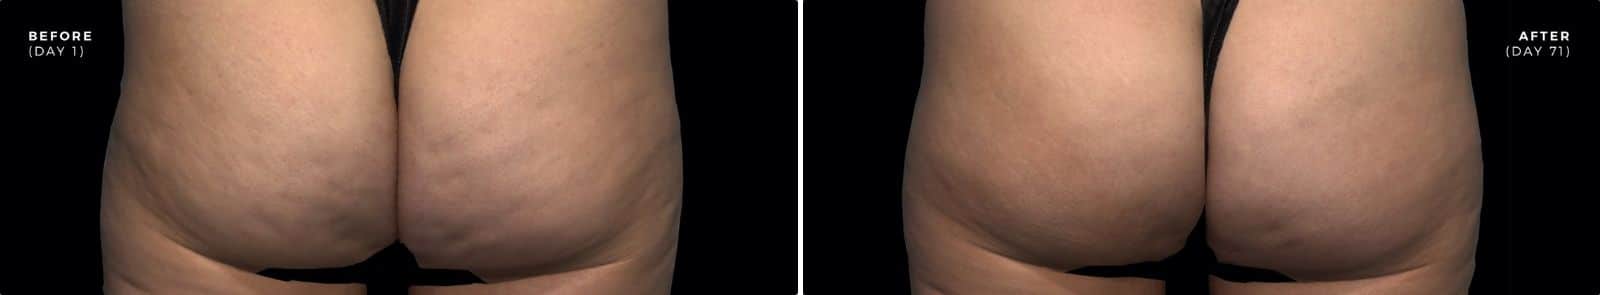 before and after pics of qwo cellulite treatment